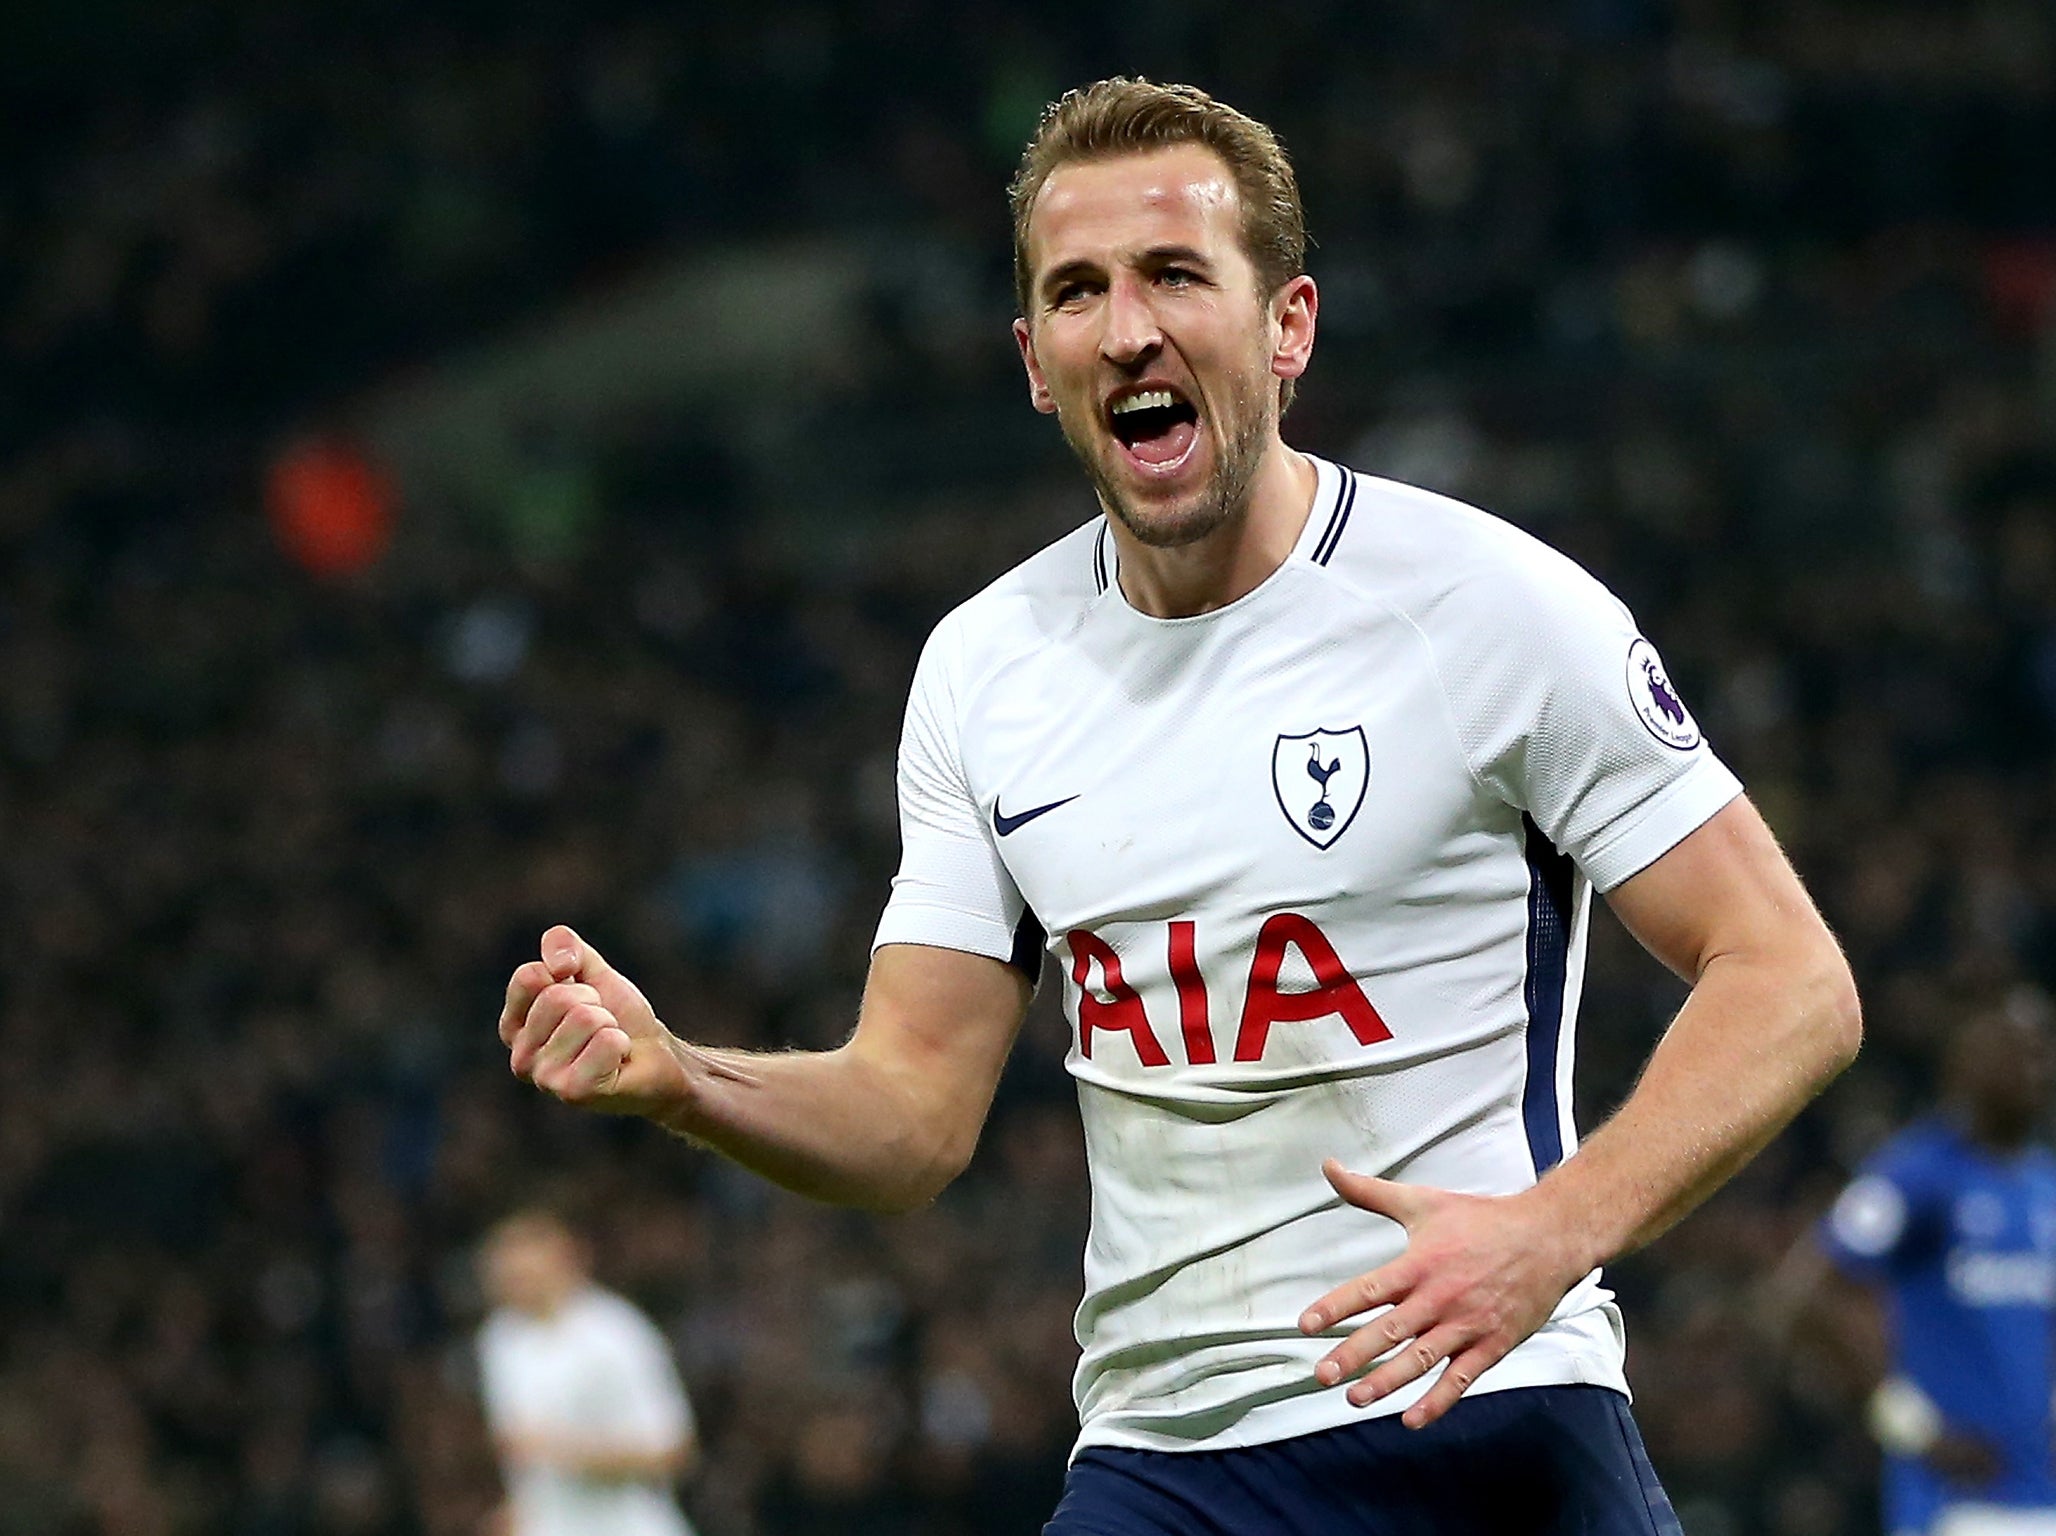 Liverpool transfer genius made clear again as Harry Kane money